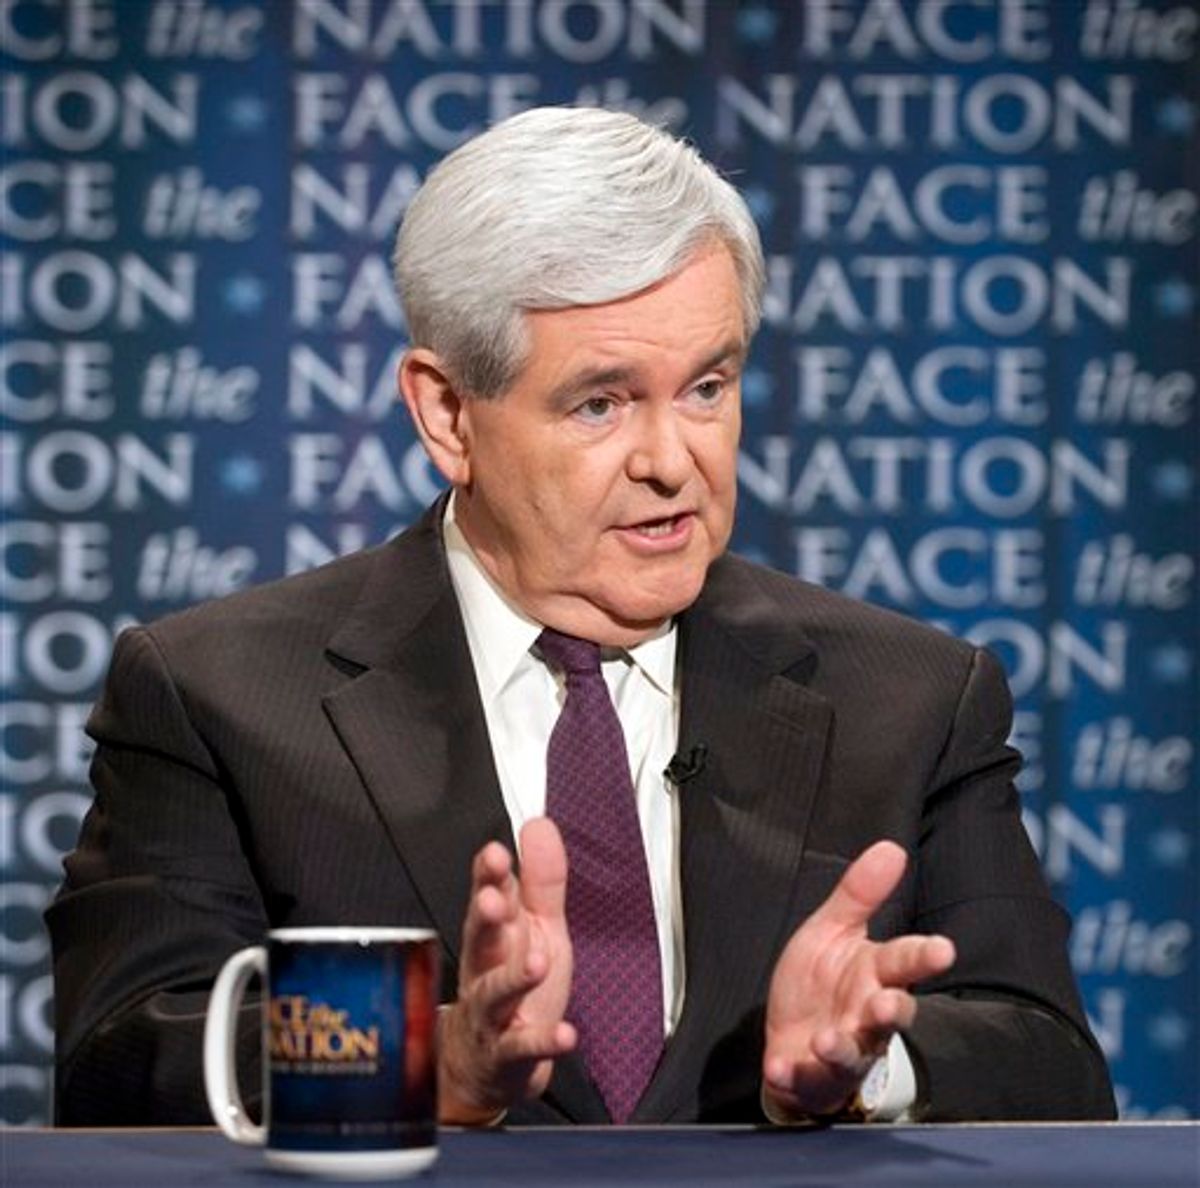 In this photo provided by CBS News, former House Speaker and Republican  presidential candidate Newt Gingrich gestures as he speaks with host Bob Schieffer, not shown, on CBS-TV's "Face the Nation," Sunday, May 22, 2011, in Washington D.C. (AP Photo/CBS News, Chris Usher) (AP)